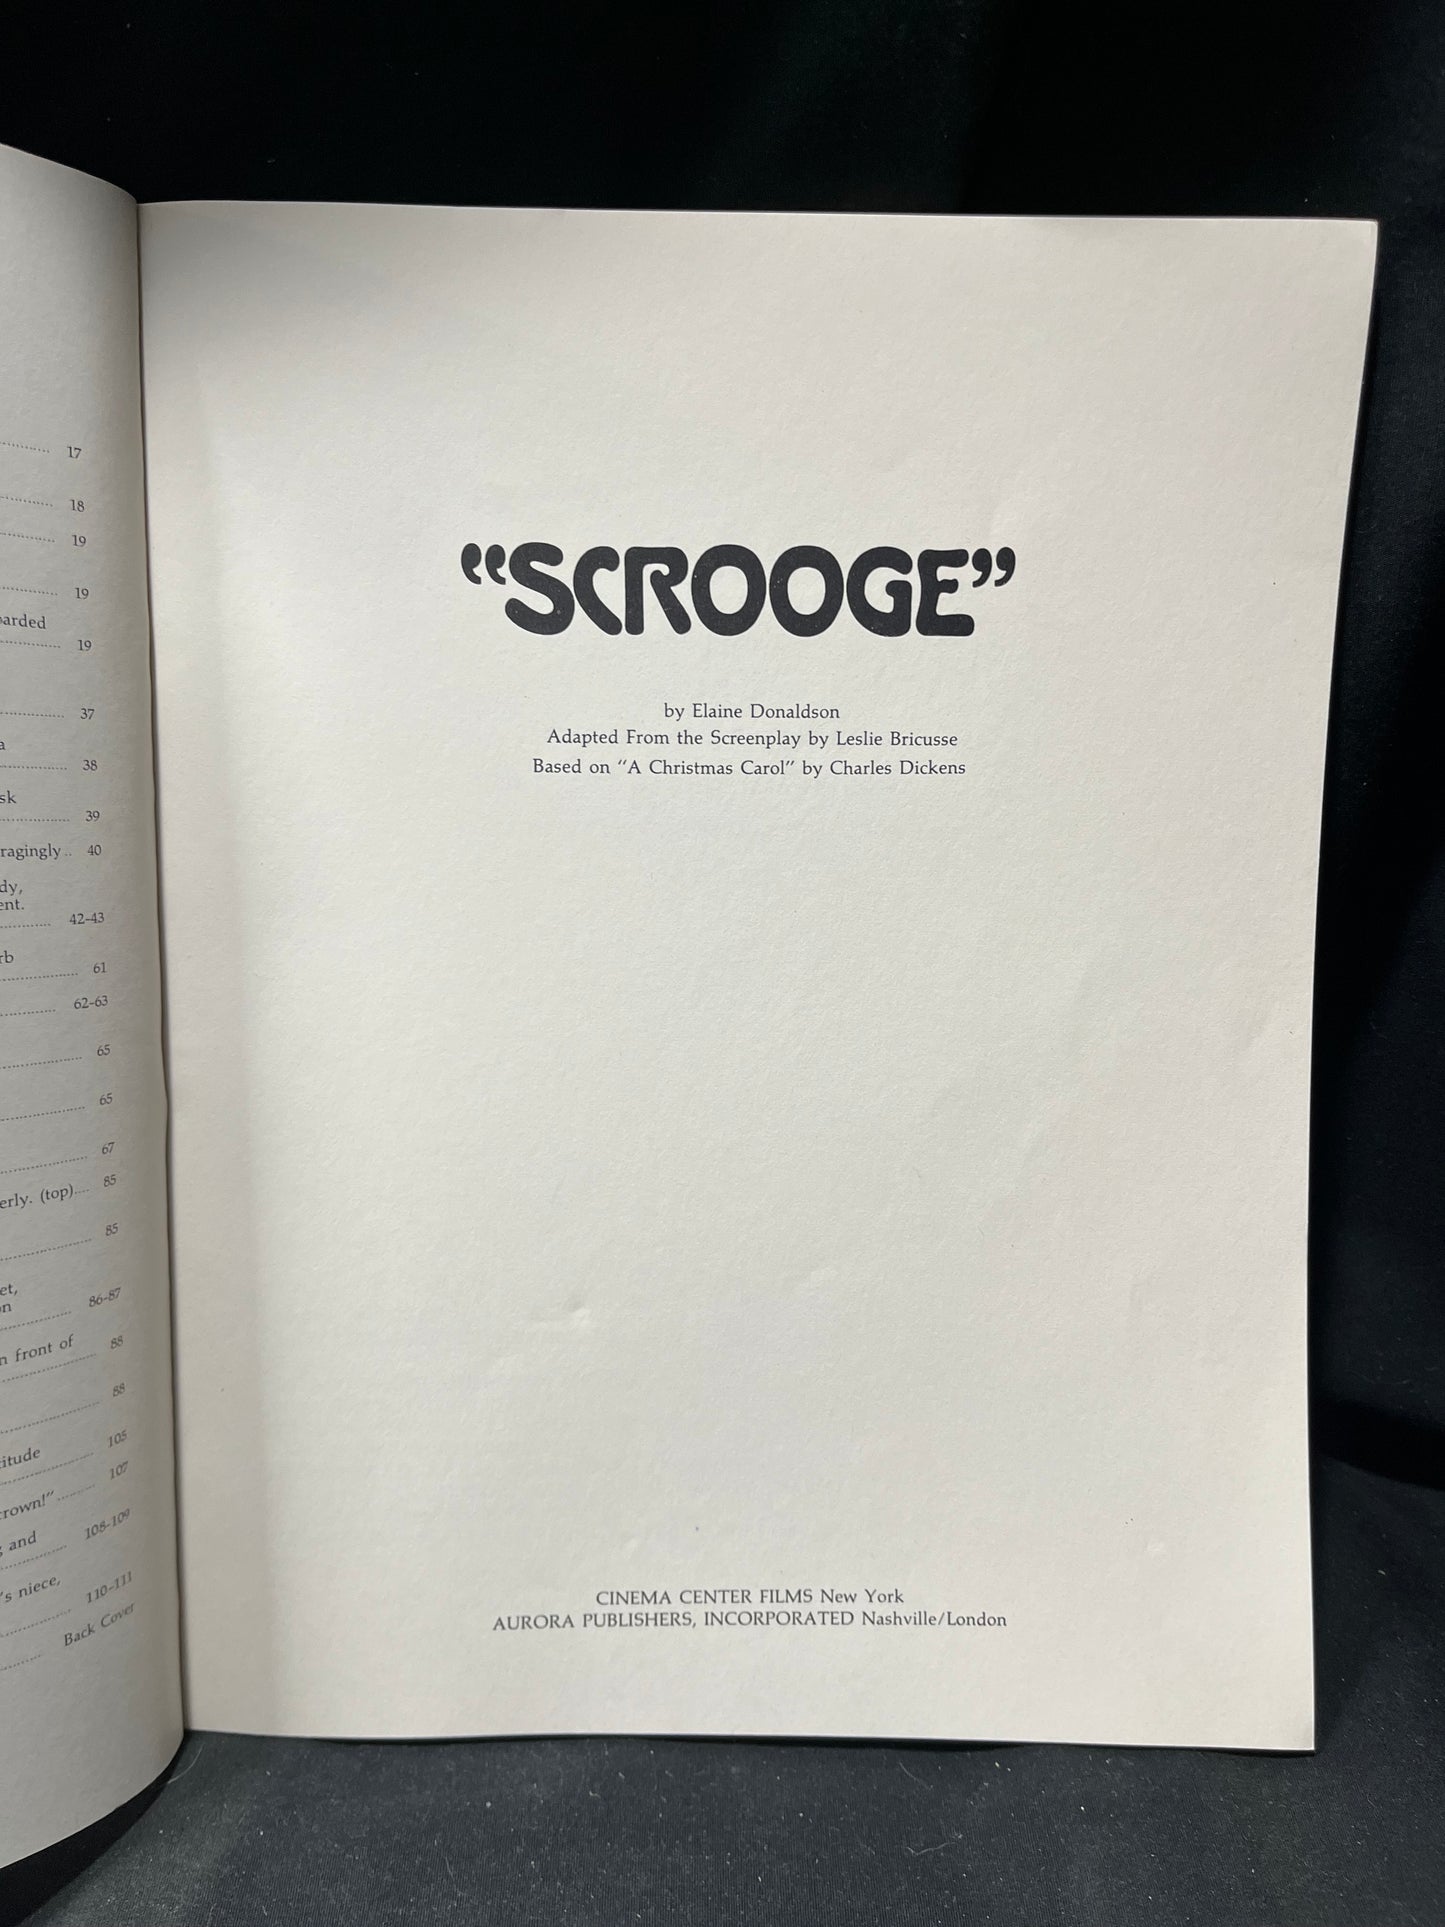 "Scrooge" by Elaine Donaldson Adapted From the Screenplay by Leslie Bricusse - Paperback